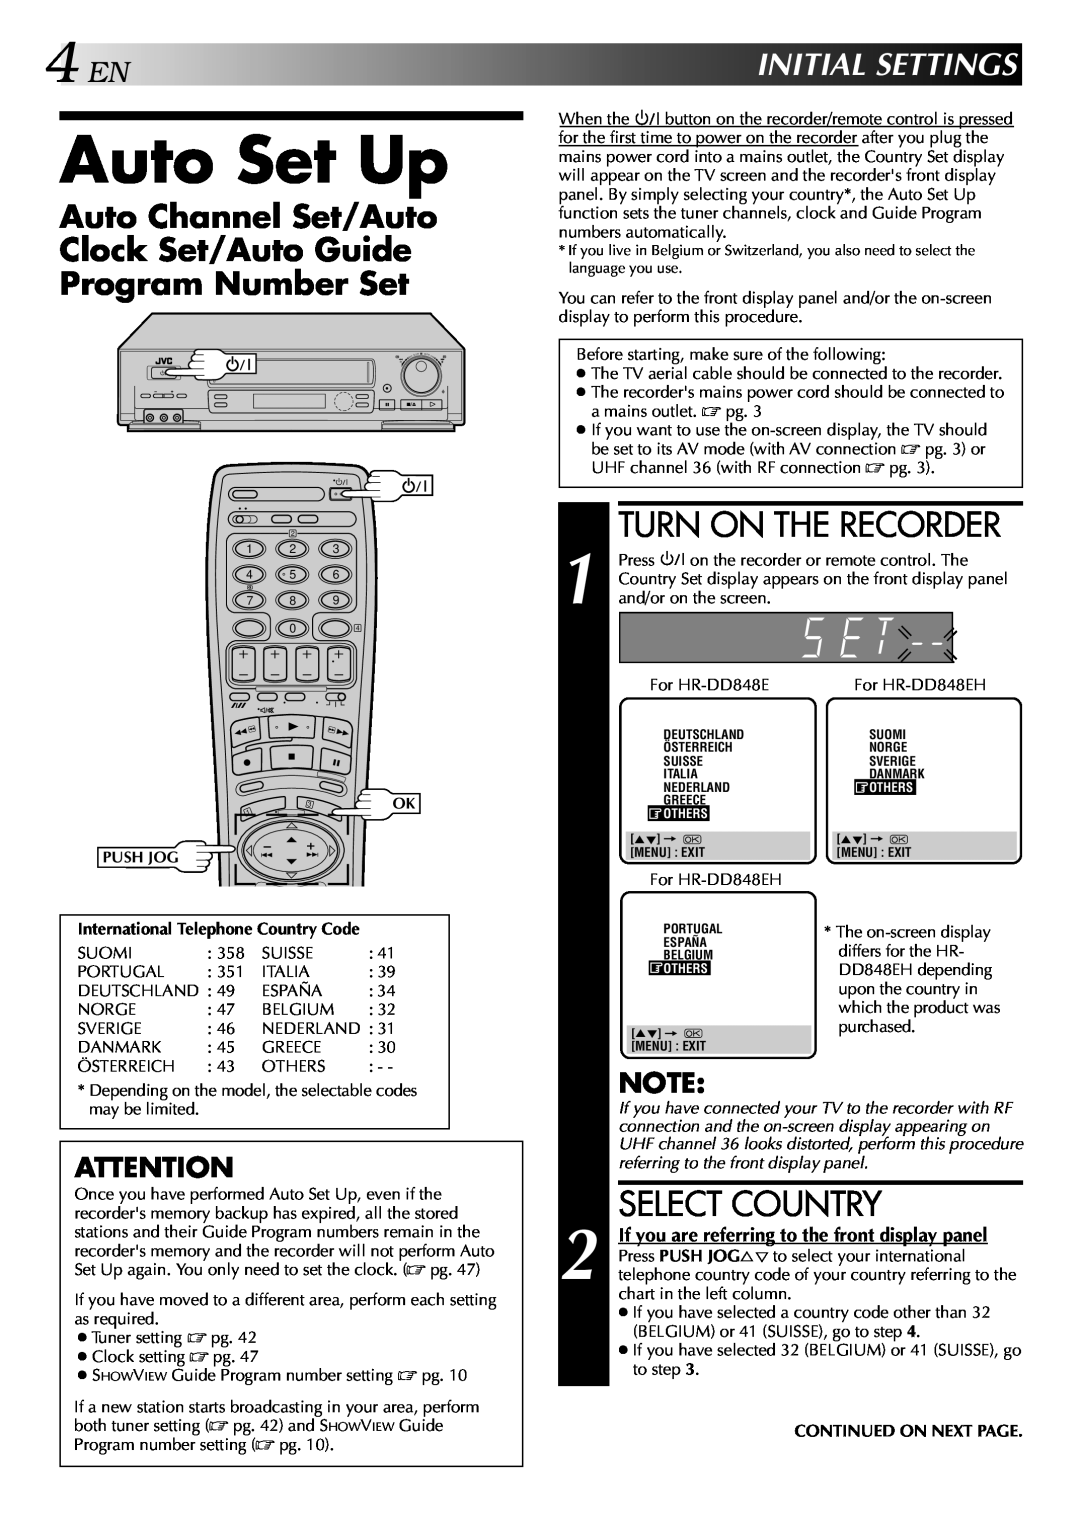 JVC Auto Set Up, Turn On The Recorder, Select Country, Initialsettings, For HR-DD848EH, Continued On Next Page 